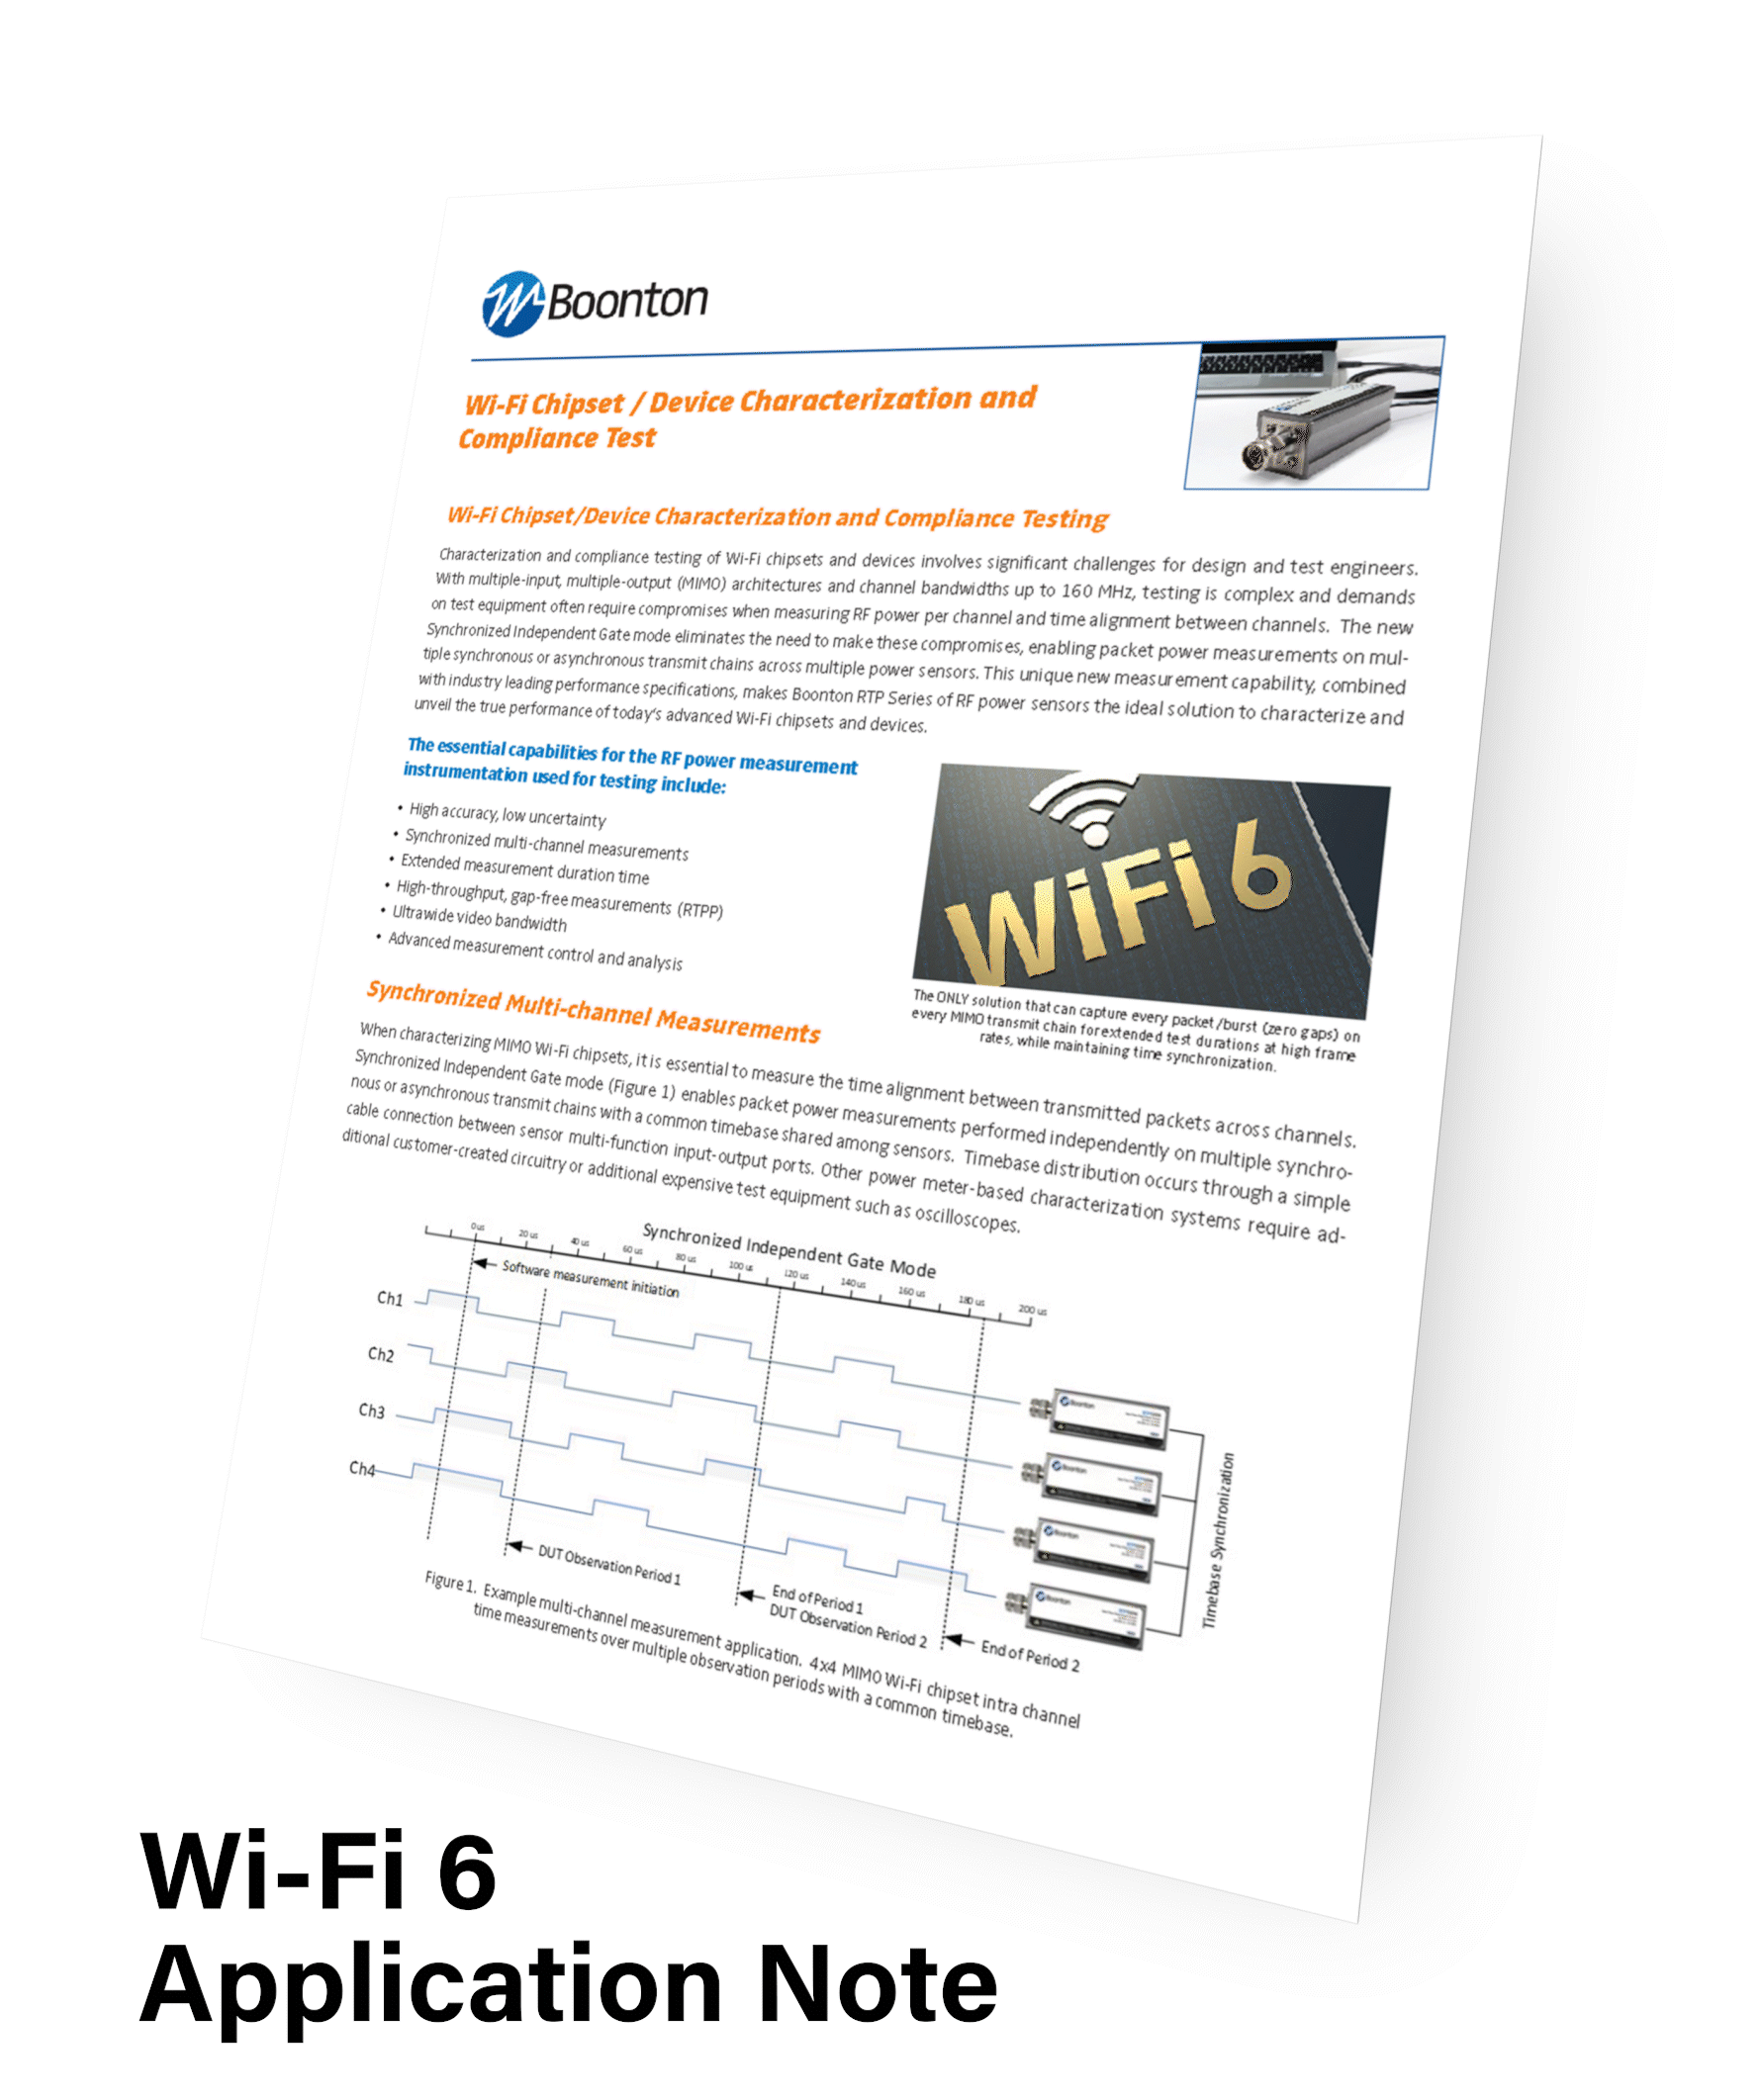 Wi-Fi 6 Application Note